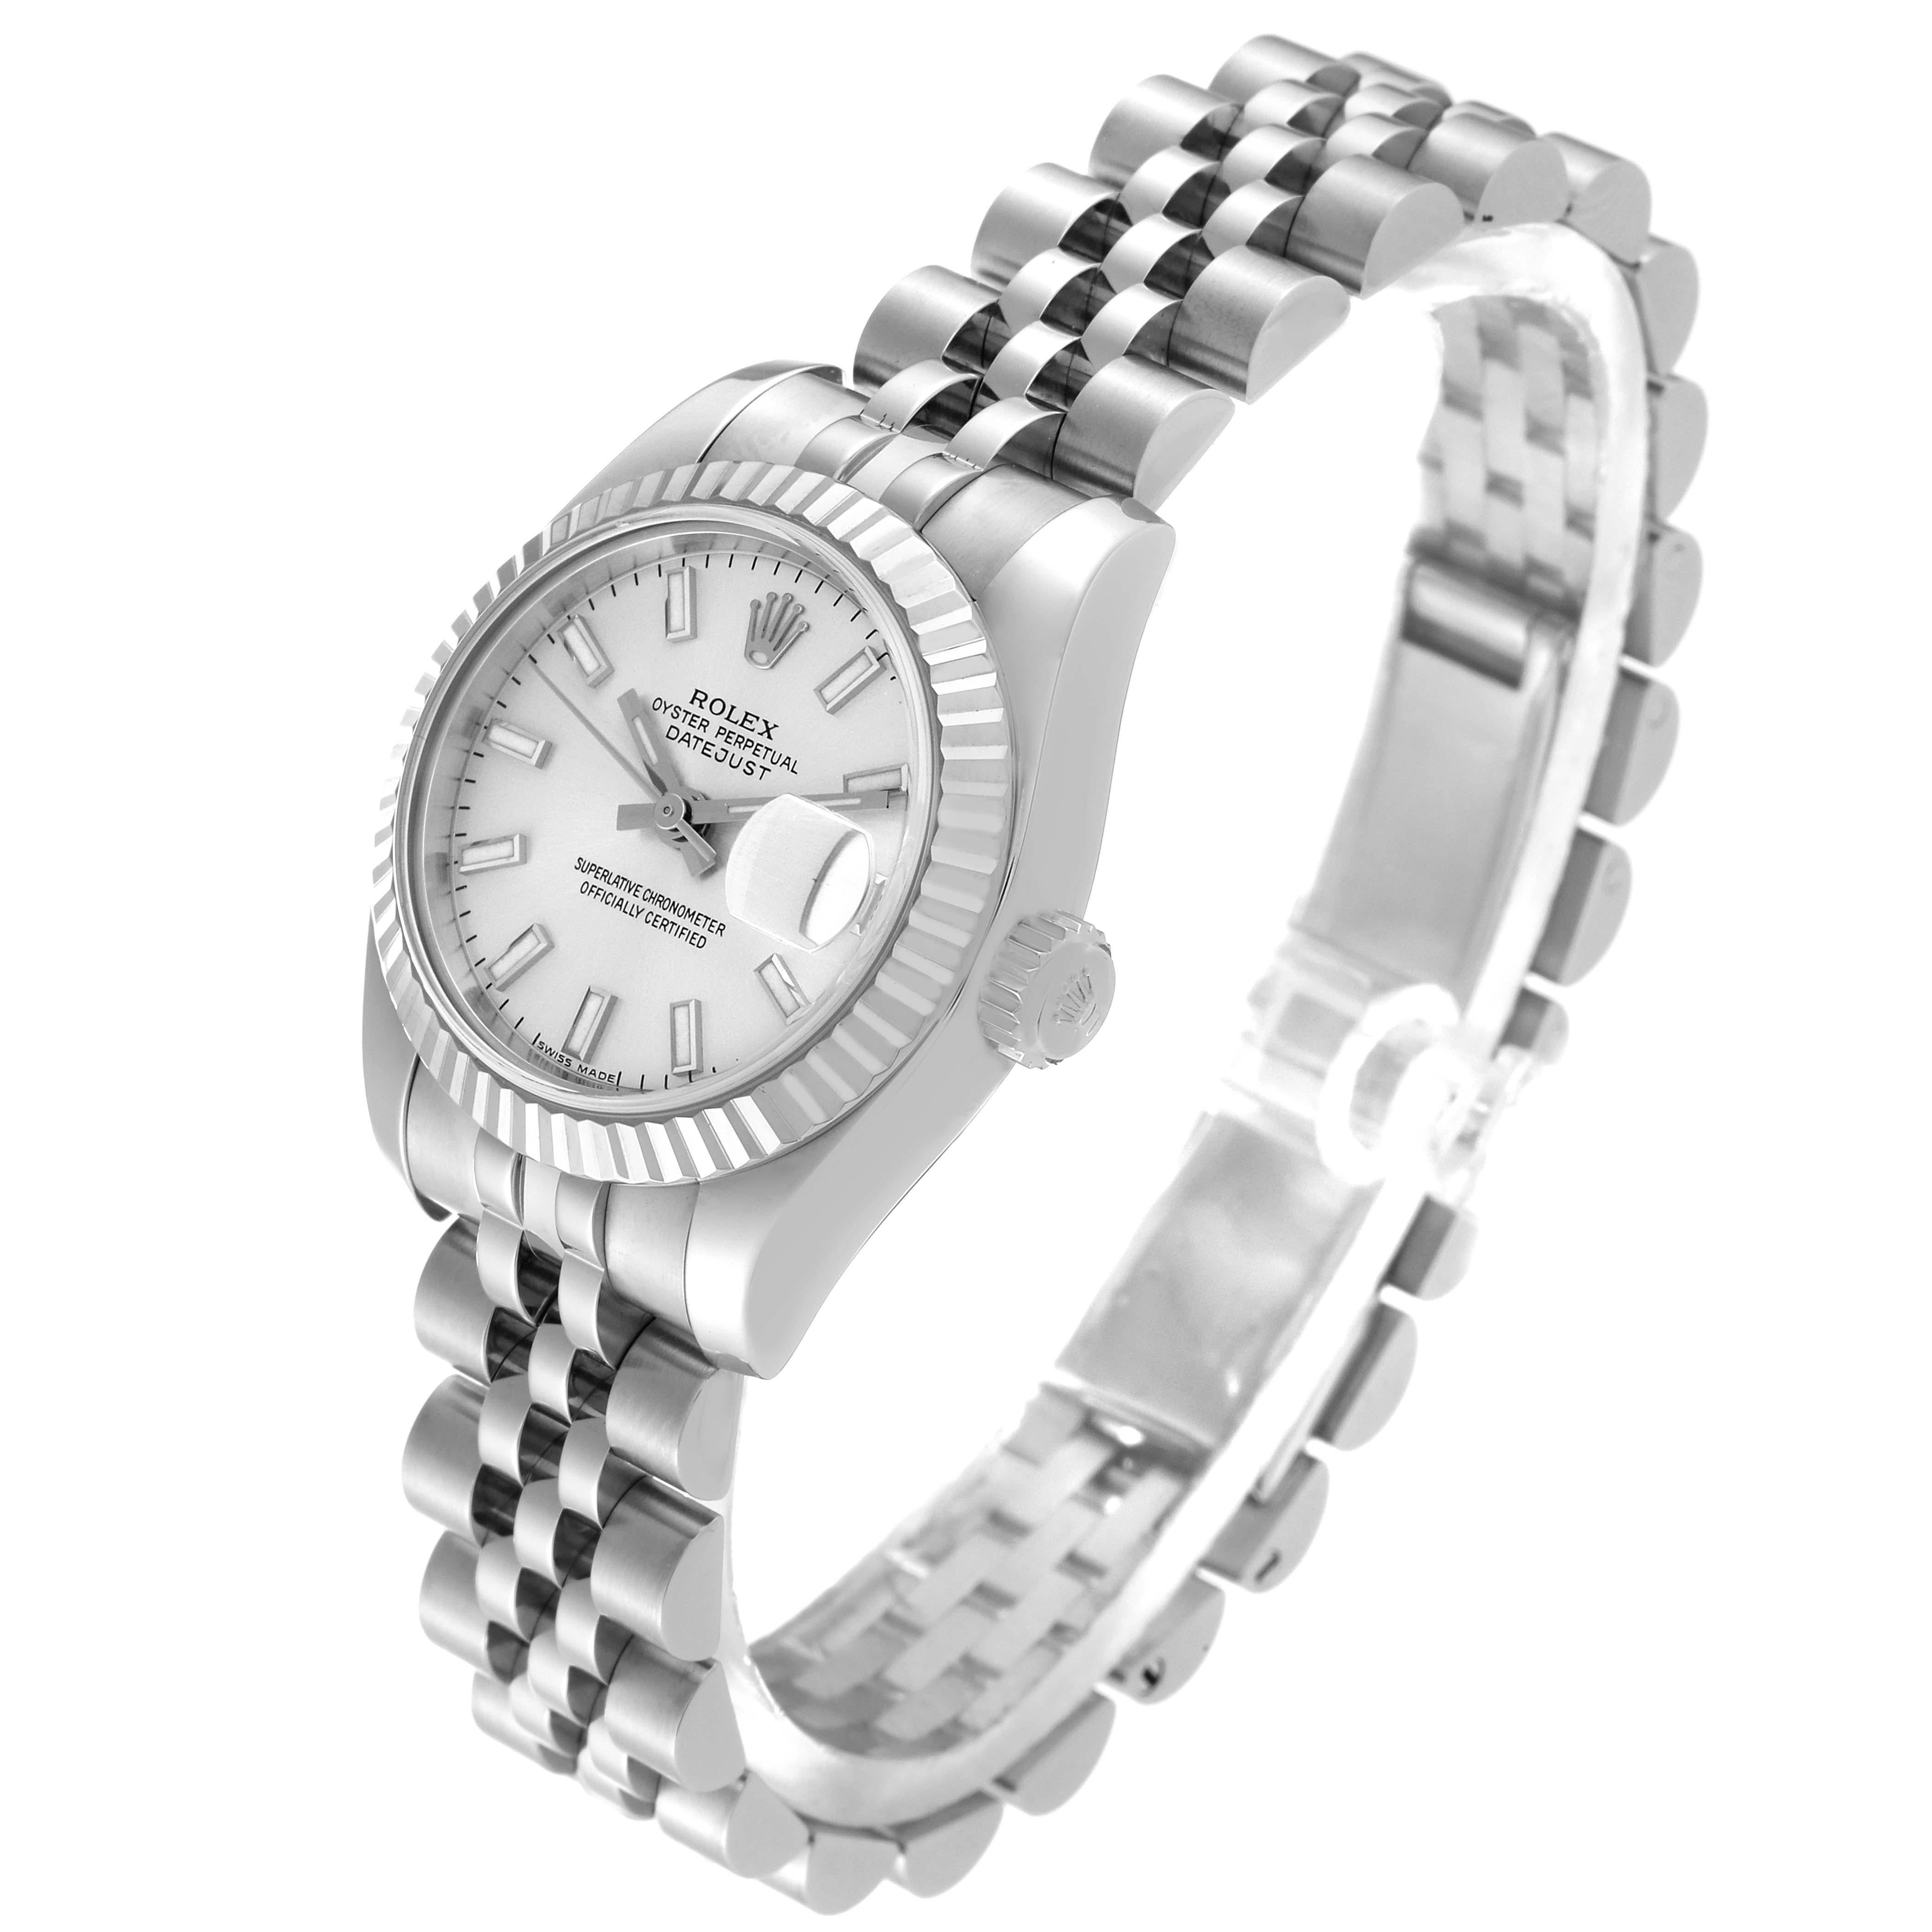 Women's Rolex Datejust Steel White Gold Silver Dial Ladies Watch 179174 Box Papers For Sale